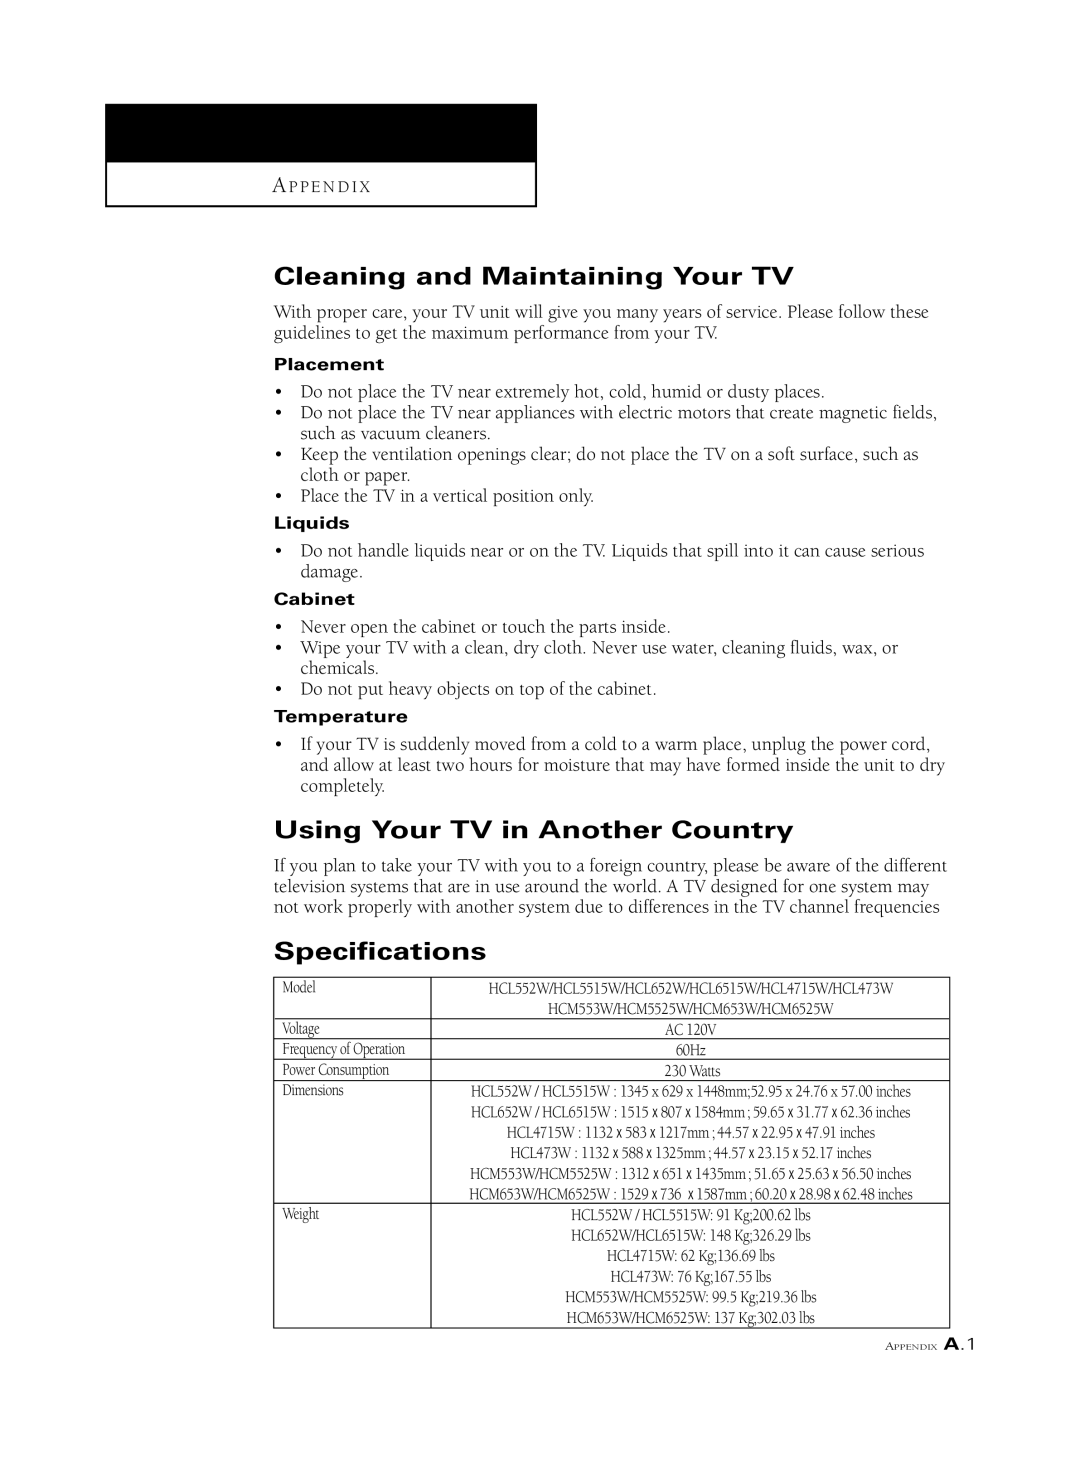 Samsung HCL5515W, HCM6525W, HCL 652W Cleaning and Maintaining Your TV, Using Your TV in Another Country, Specifications 